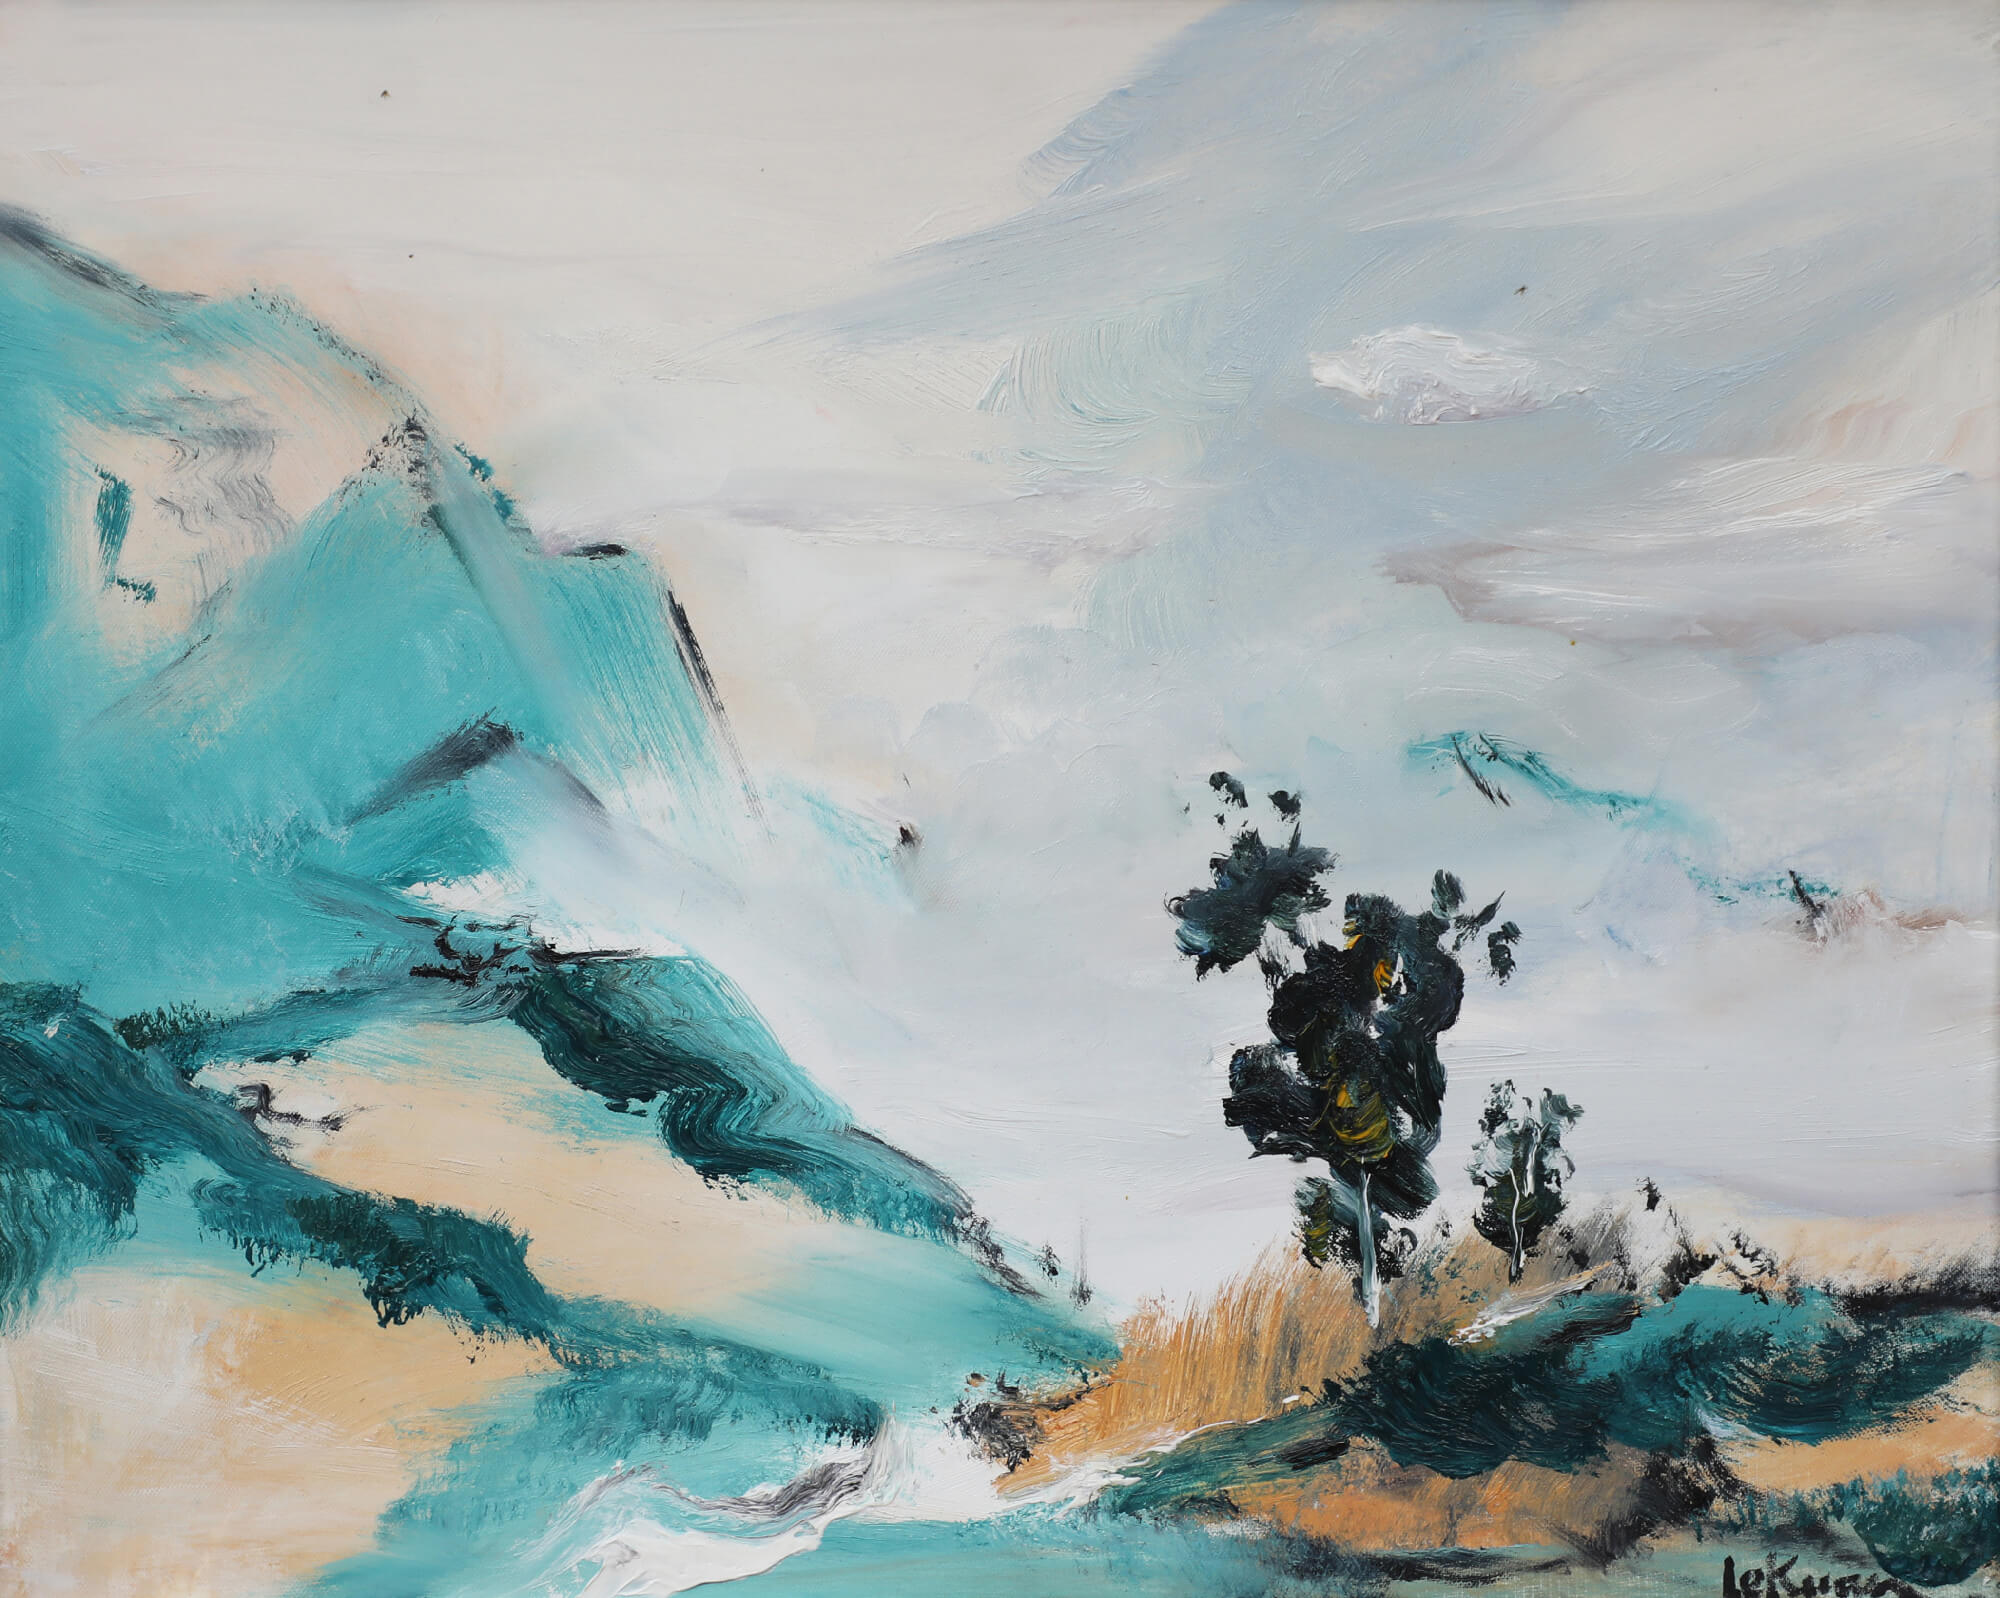 Trees & Mountains - Exclusive Painting by Le Kuan on Nguyen Art Gallery